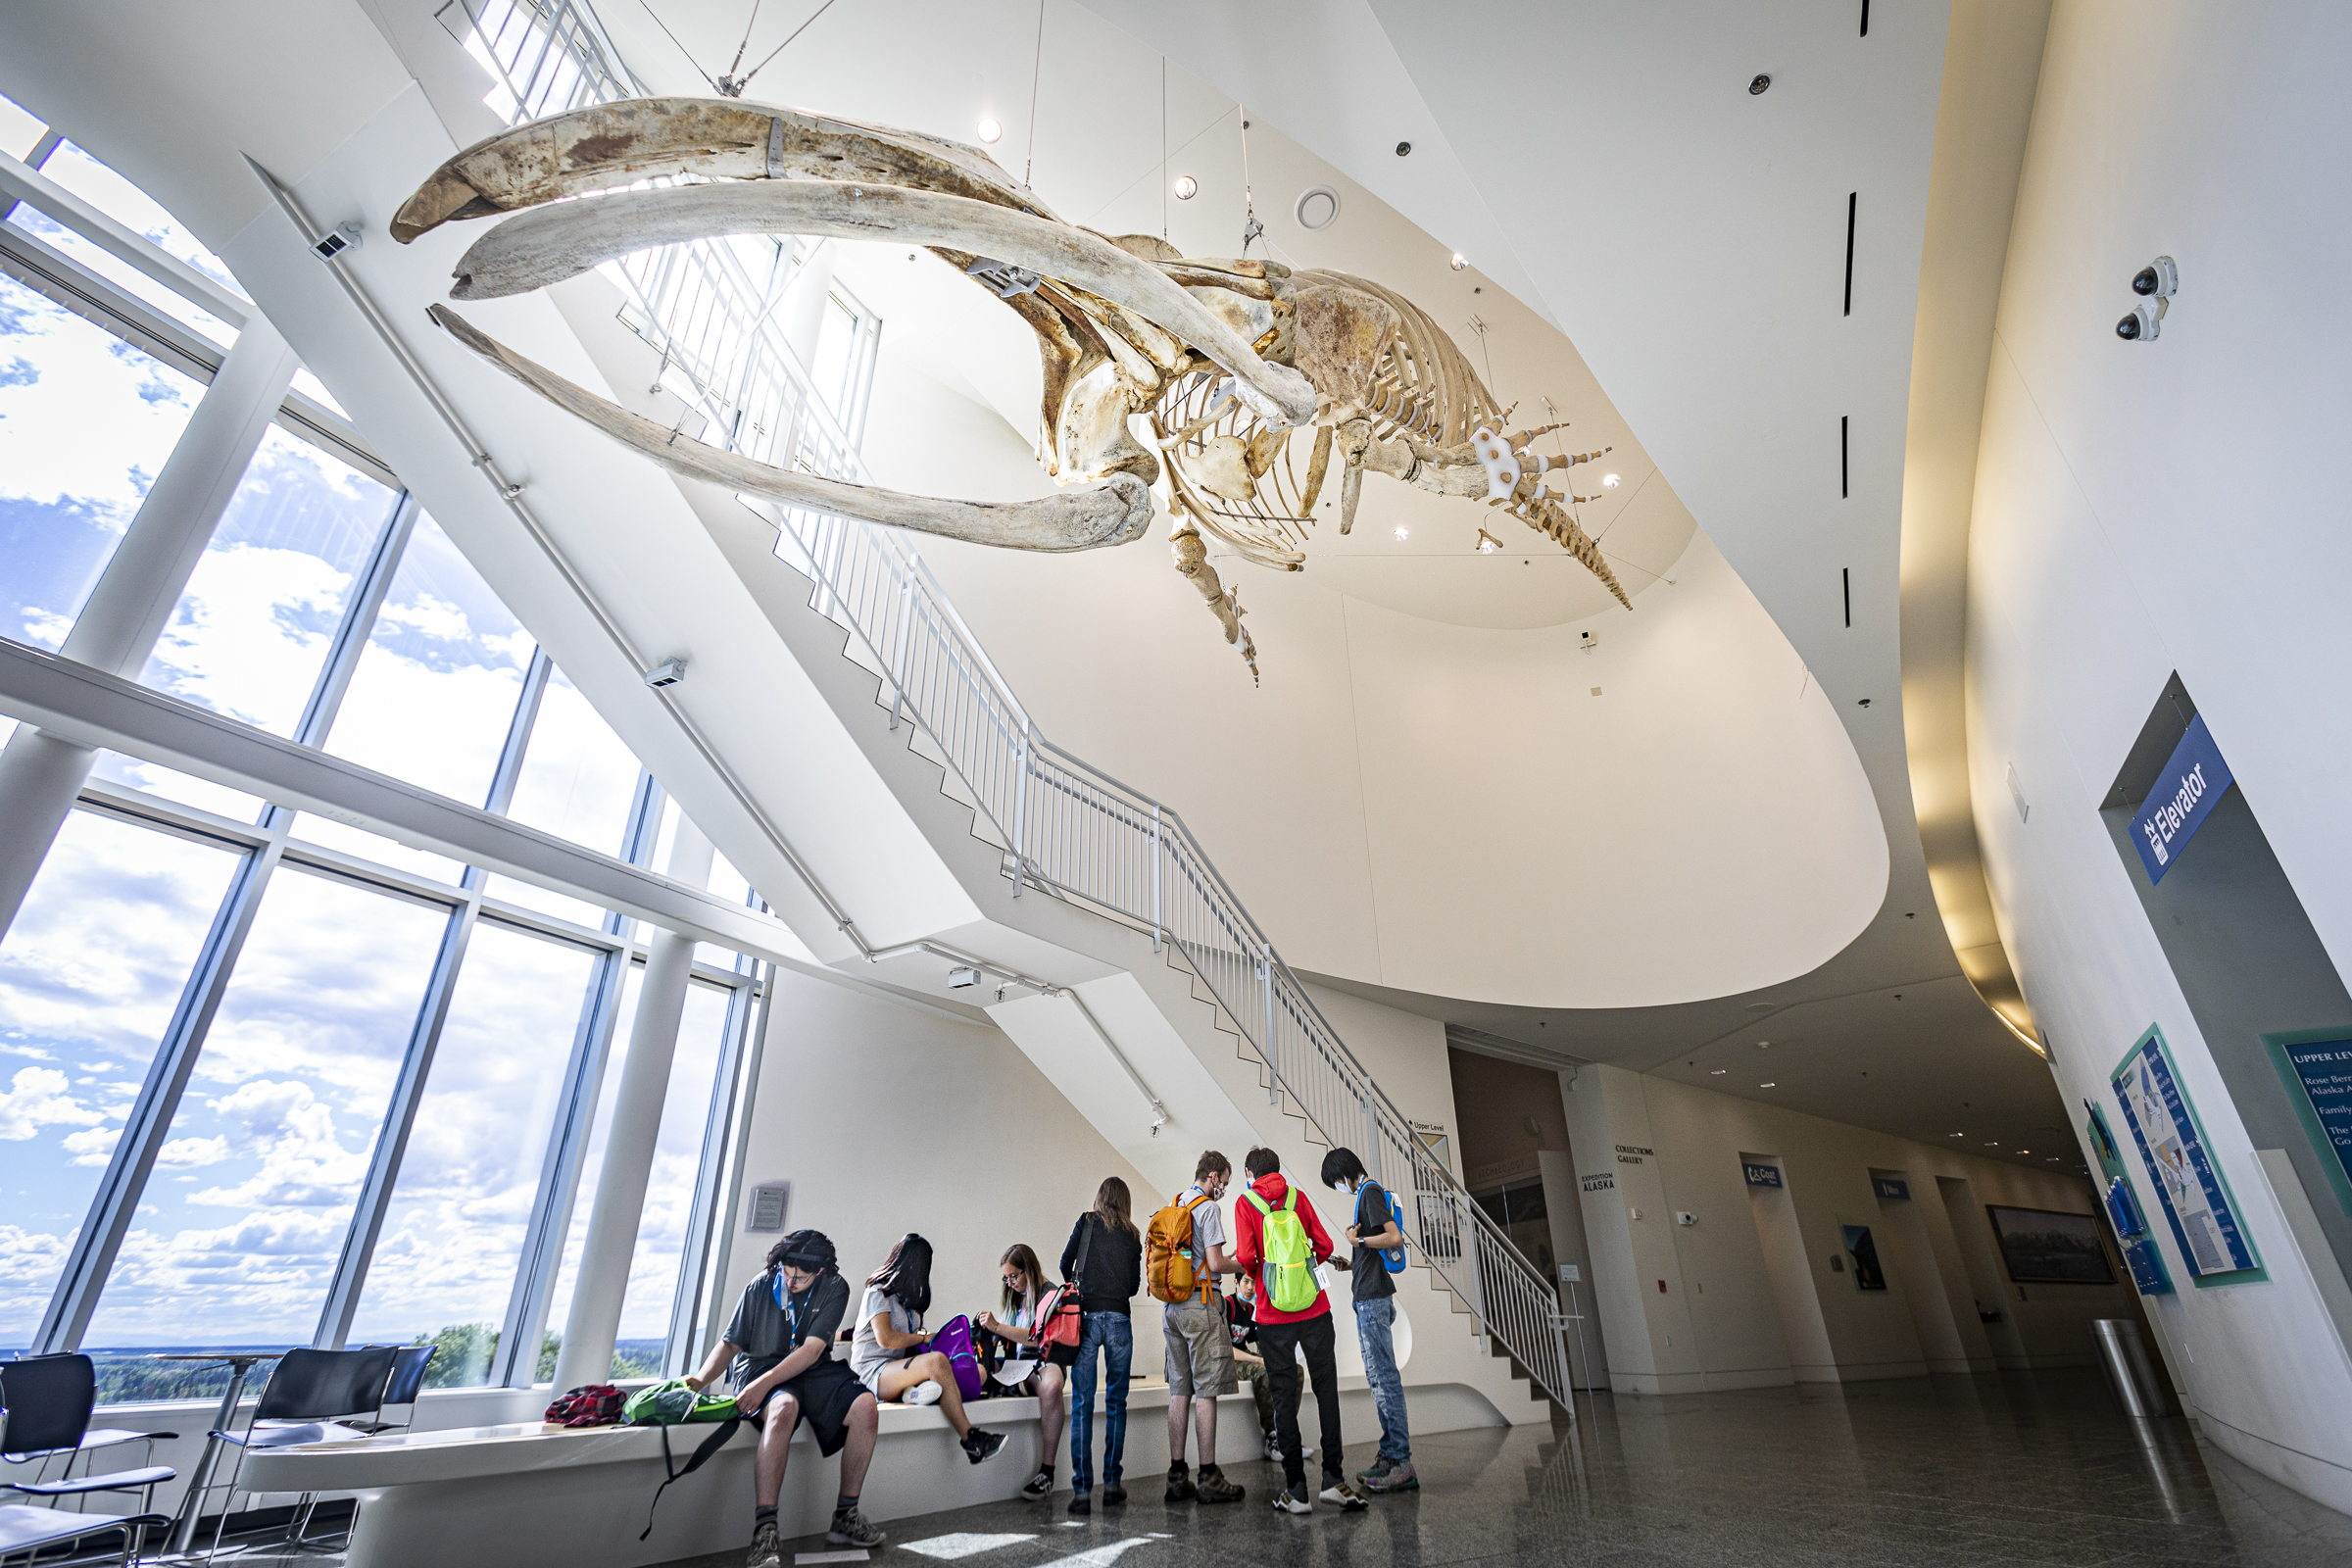 A group of visitors stand under a hanging fossil exhibit